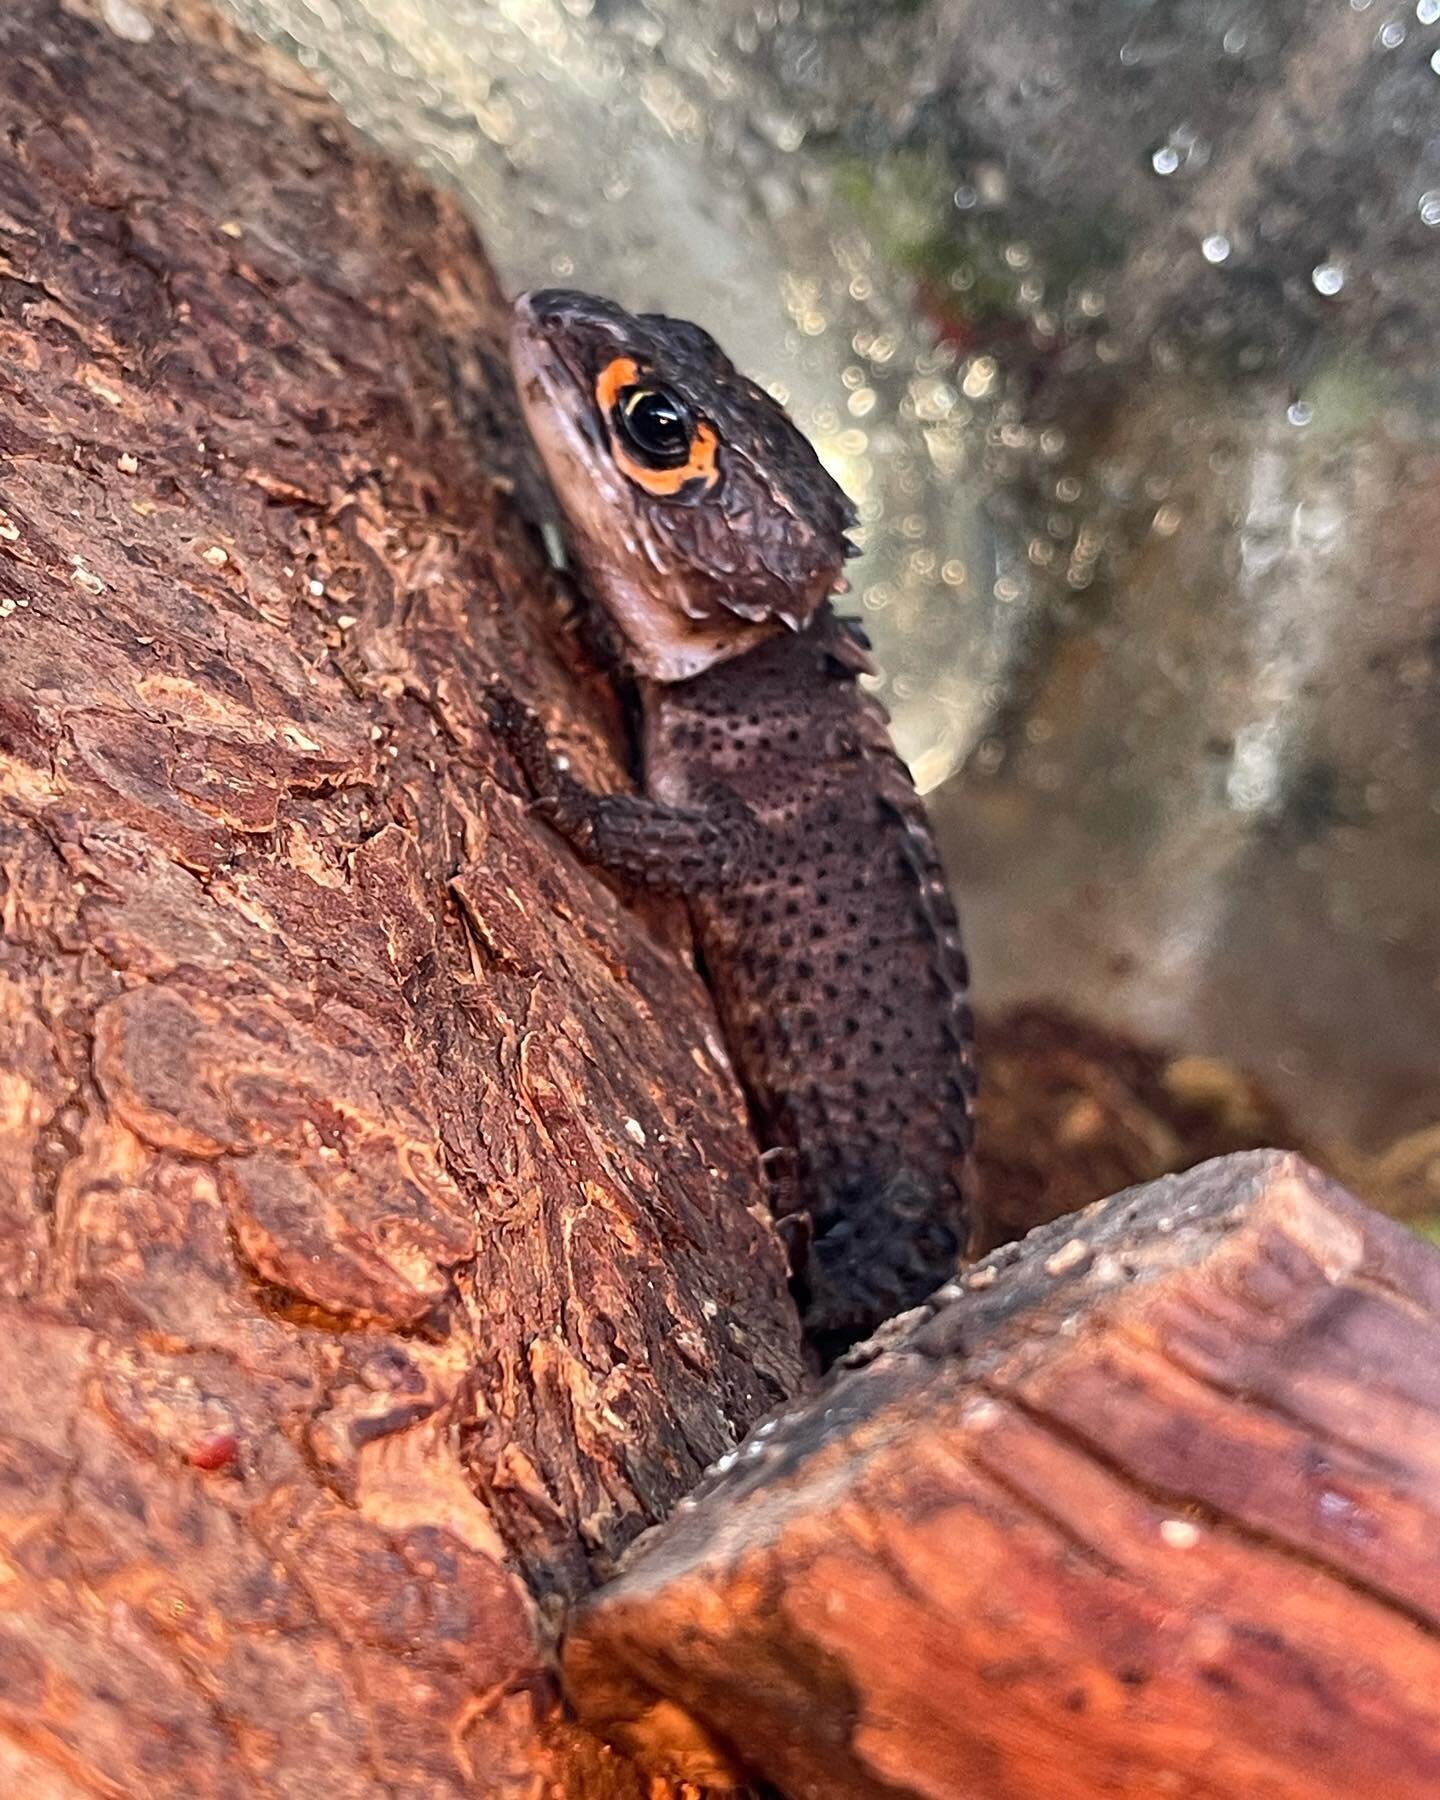 Baby dragons now available!!
Just kidding😉 but man these dudes look the part.  Red eyed crocodile skinks are just too cute to handle. ❤️#crocodileskink #redeyecrocodileskink #babydragon #dragons #reptiles #skink #animals #petsofinstagram #pets #cute